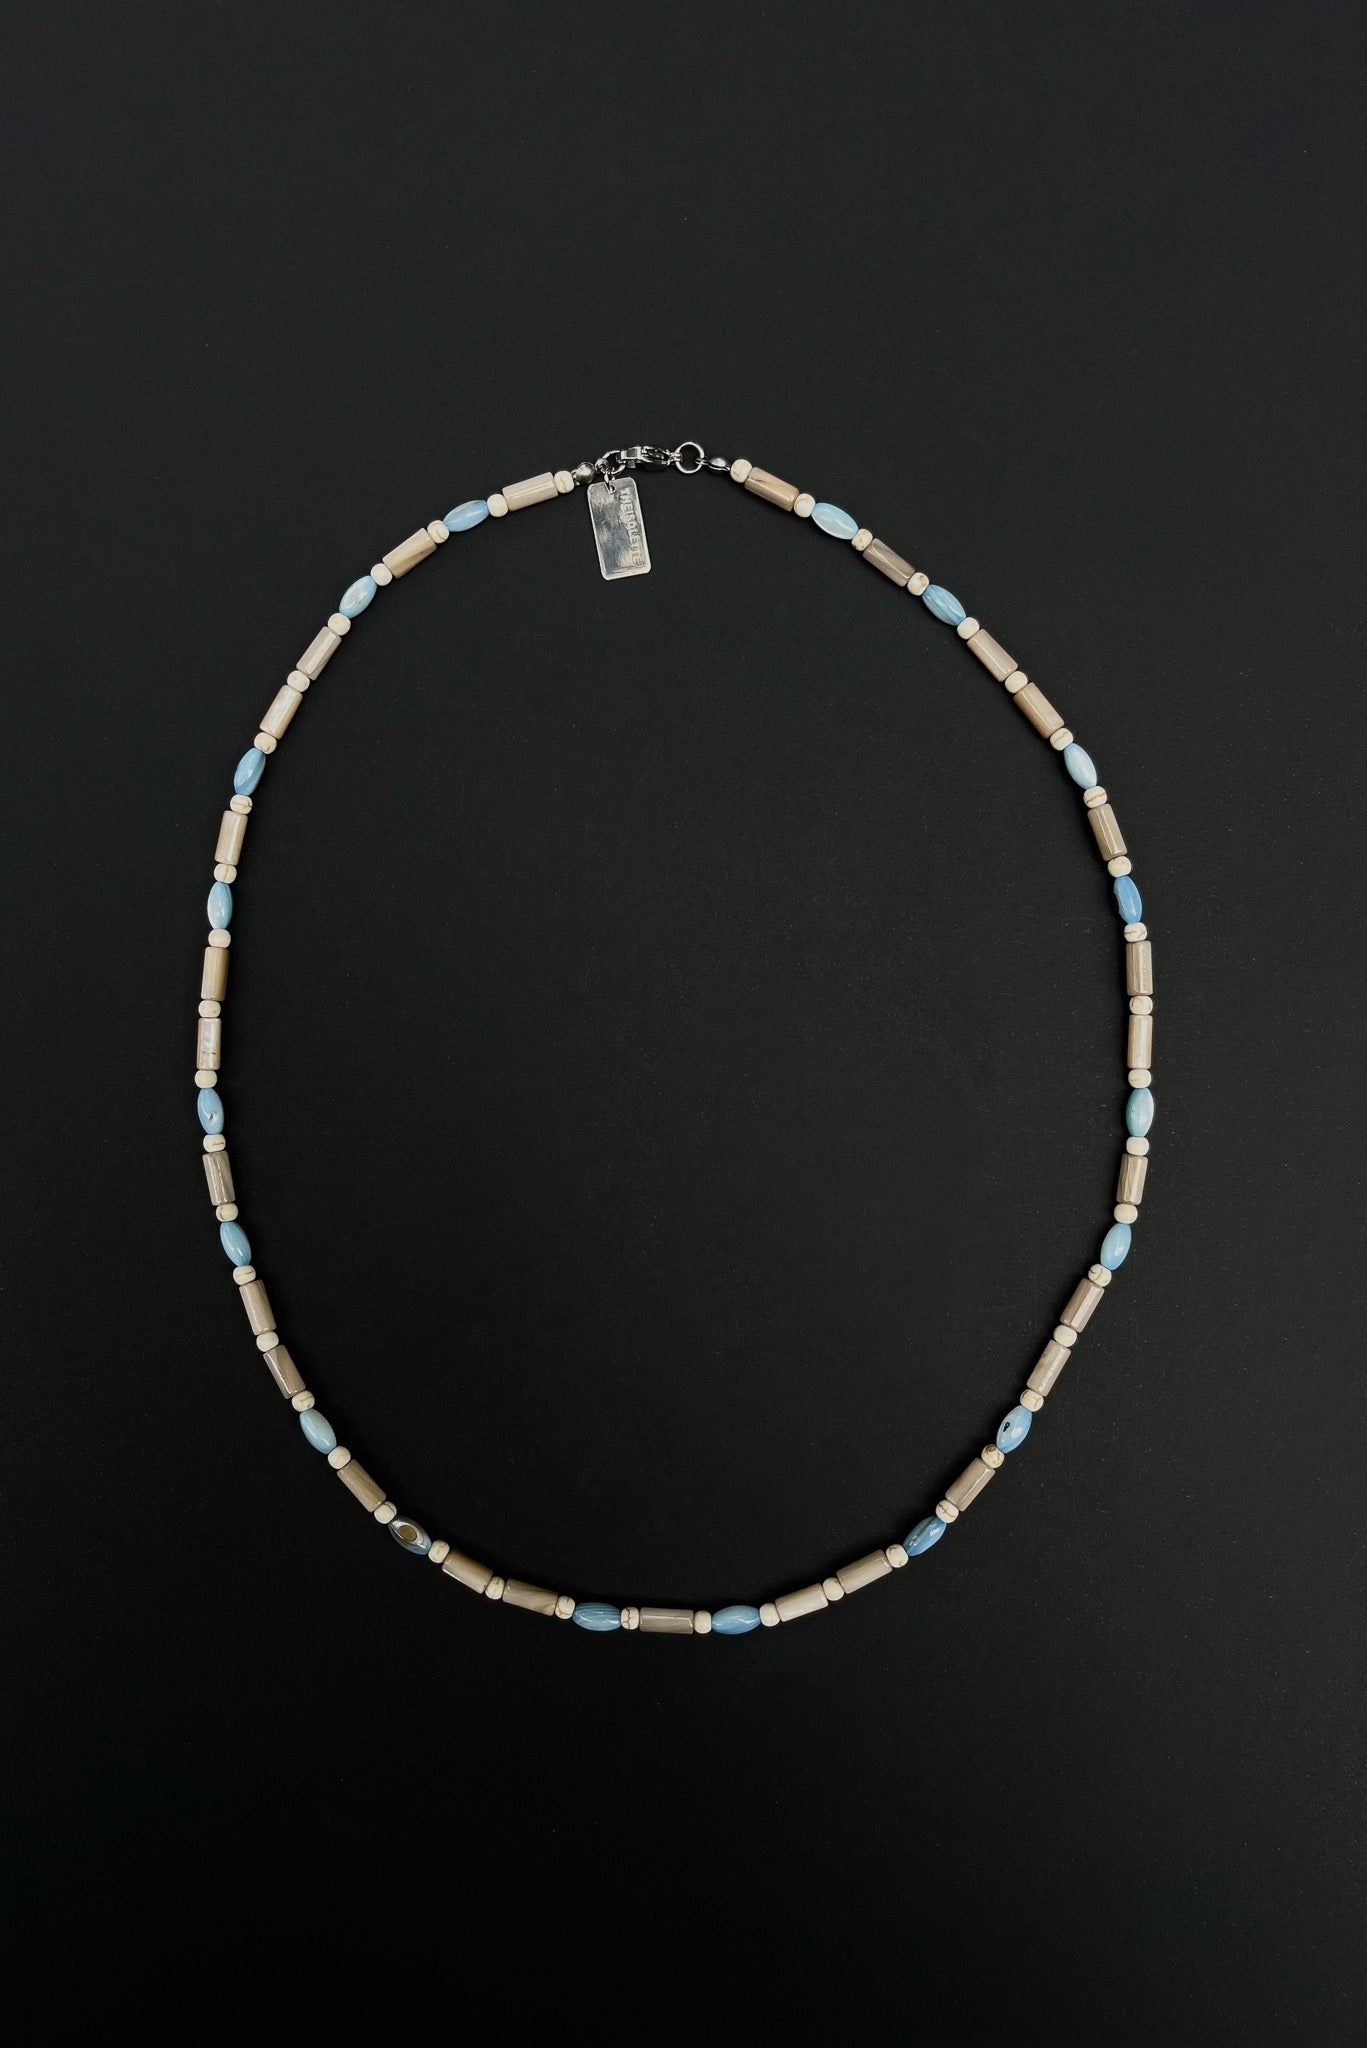 CALIFORNIA Mother of Pearl Necklace I